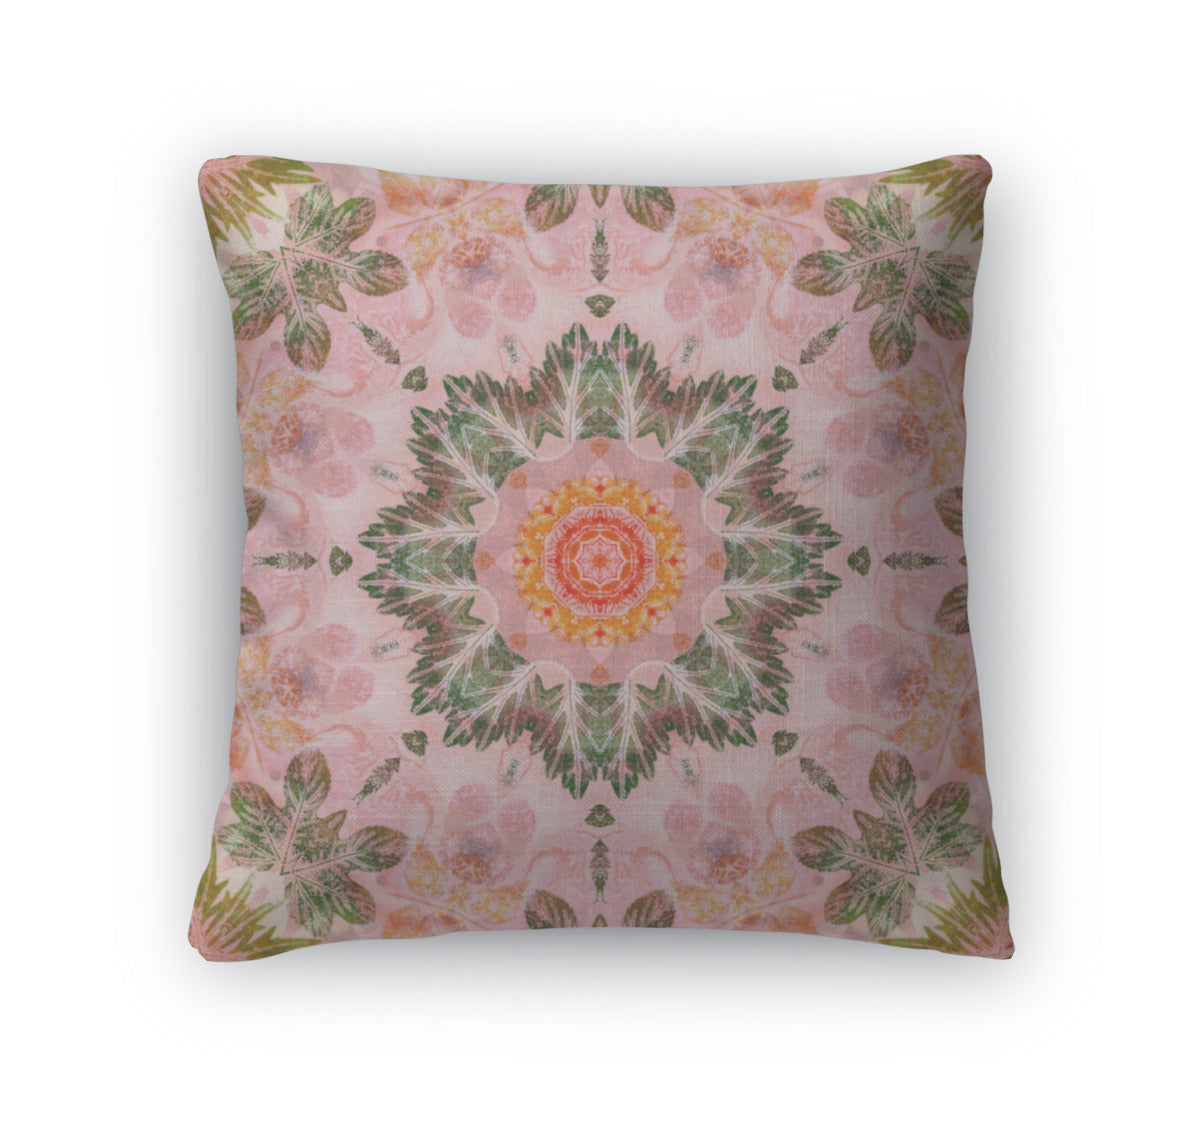 Throw Pillow, Pattern With Paintings Leaves